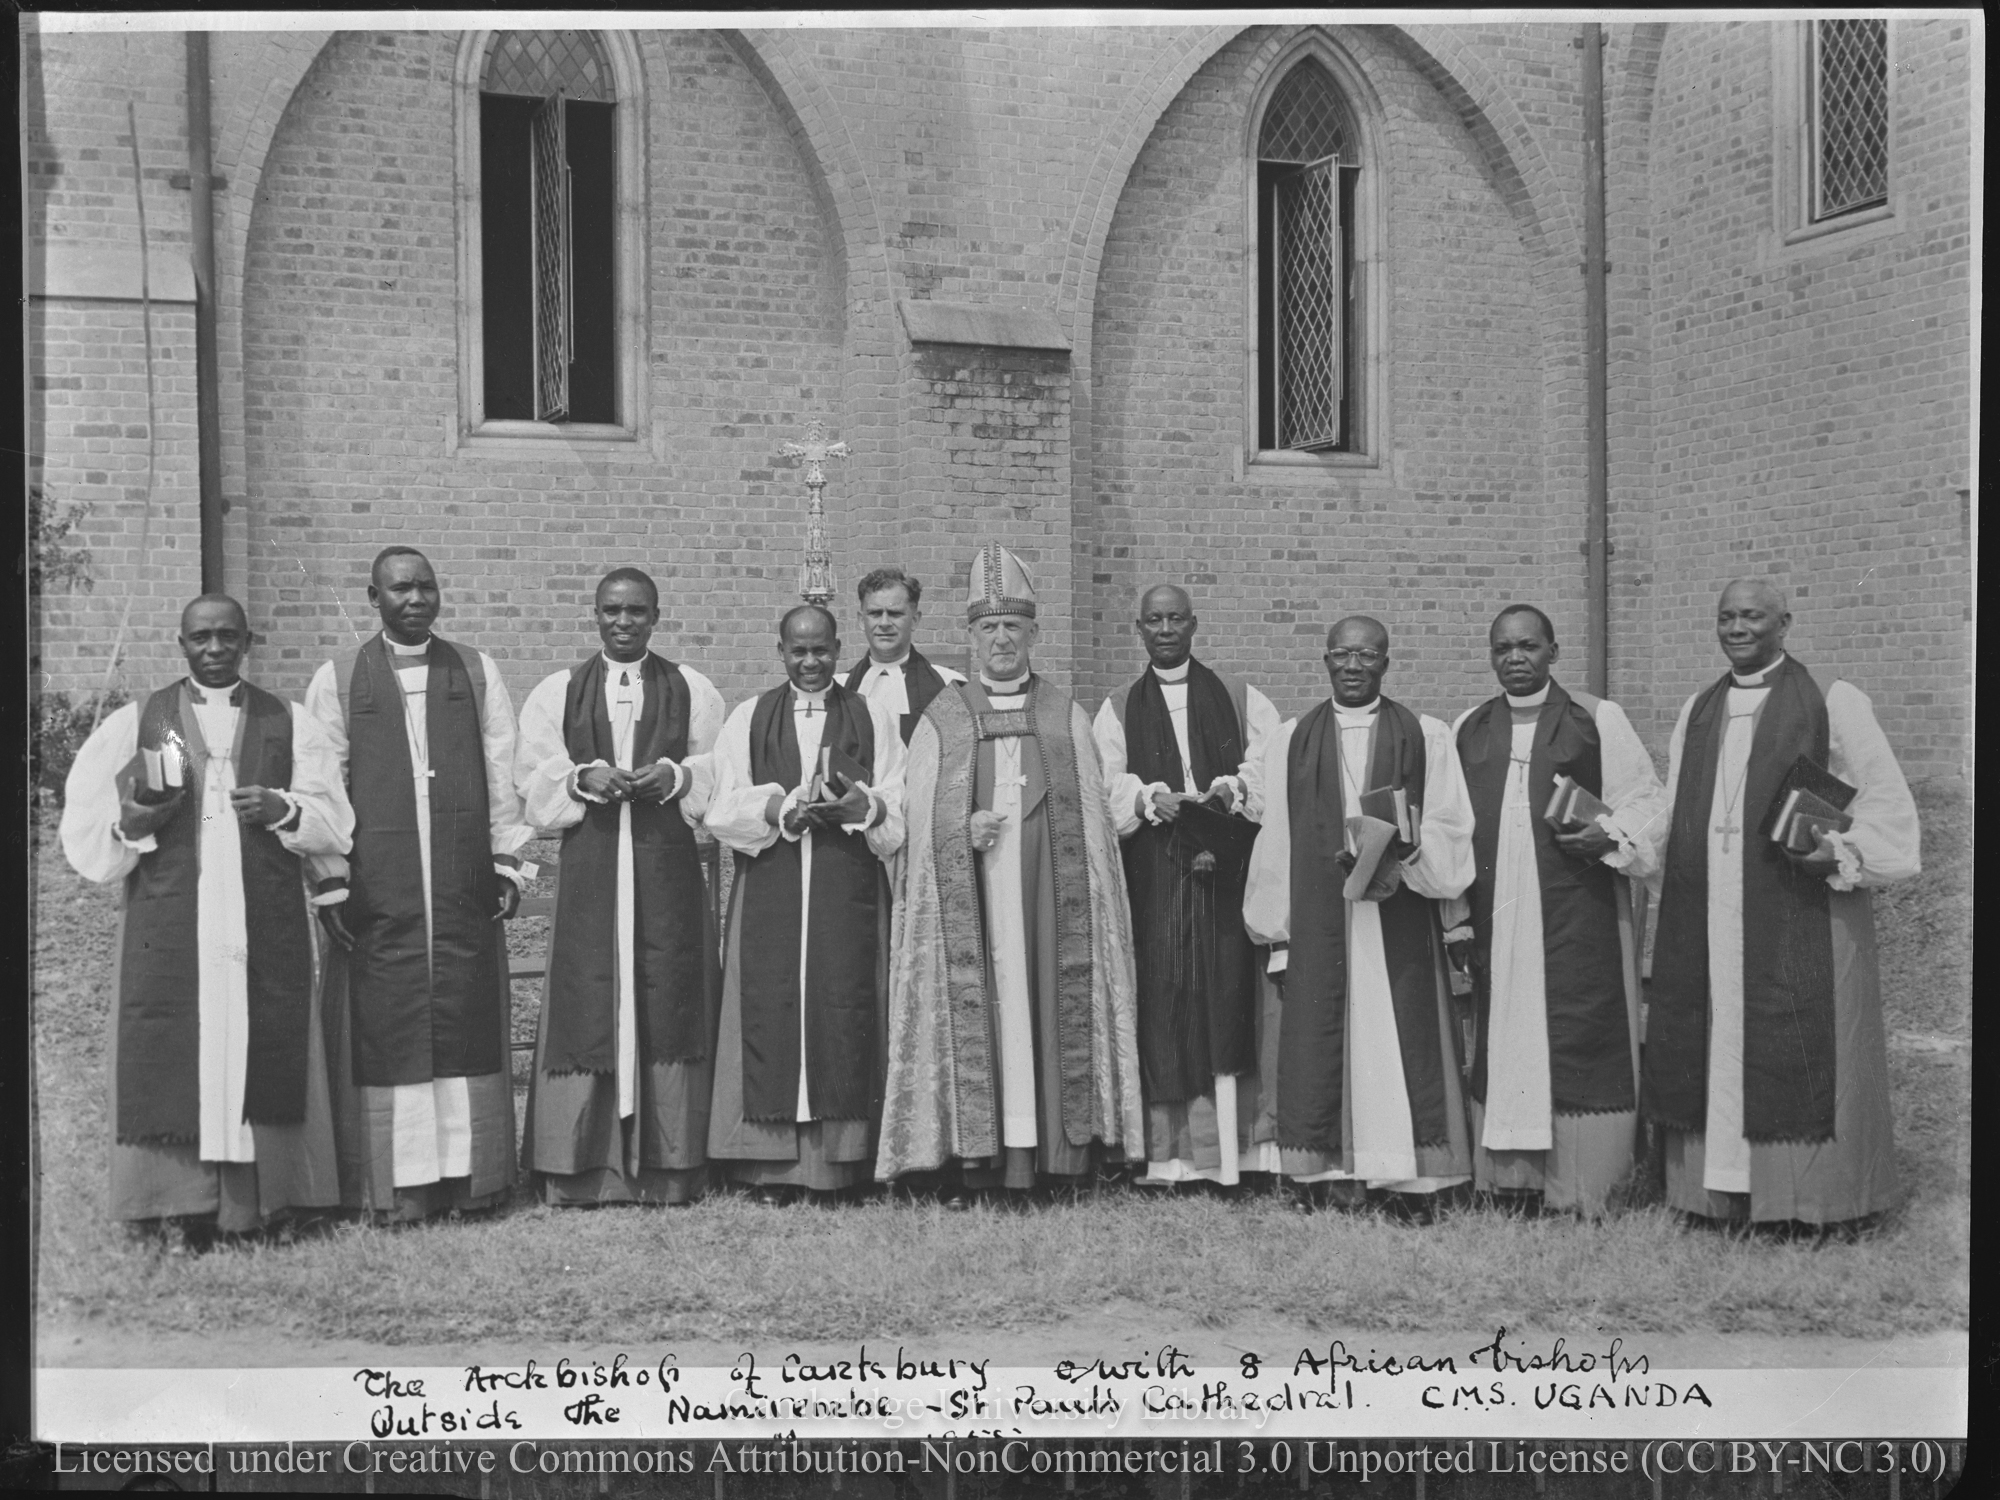 Archbishop with eight African bishops outside Namirembe Cathedral, 1955-05